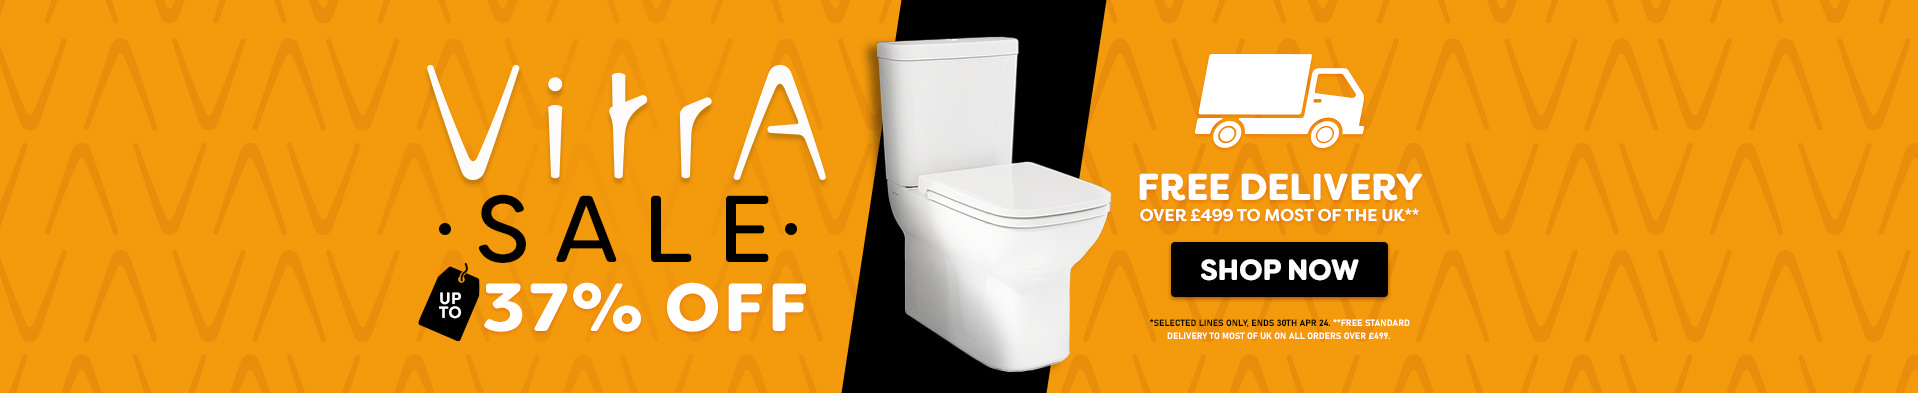 Vitra Sale - Free Delivery